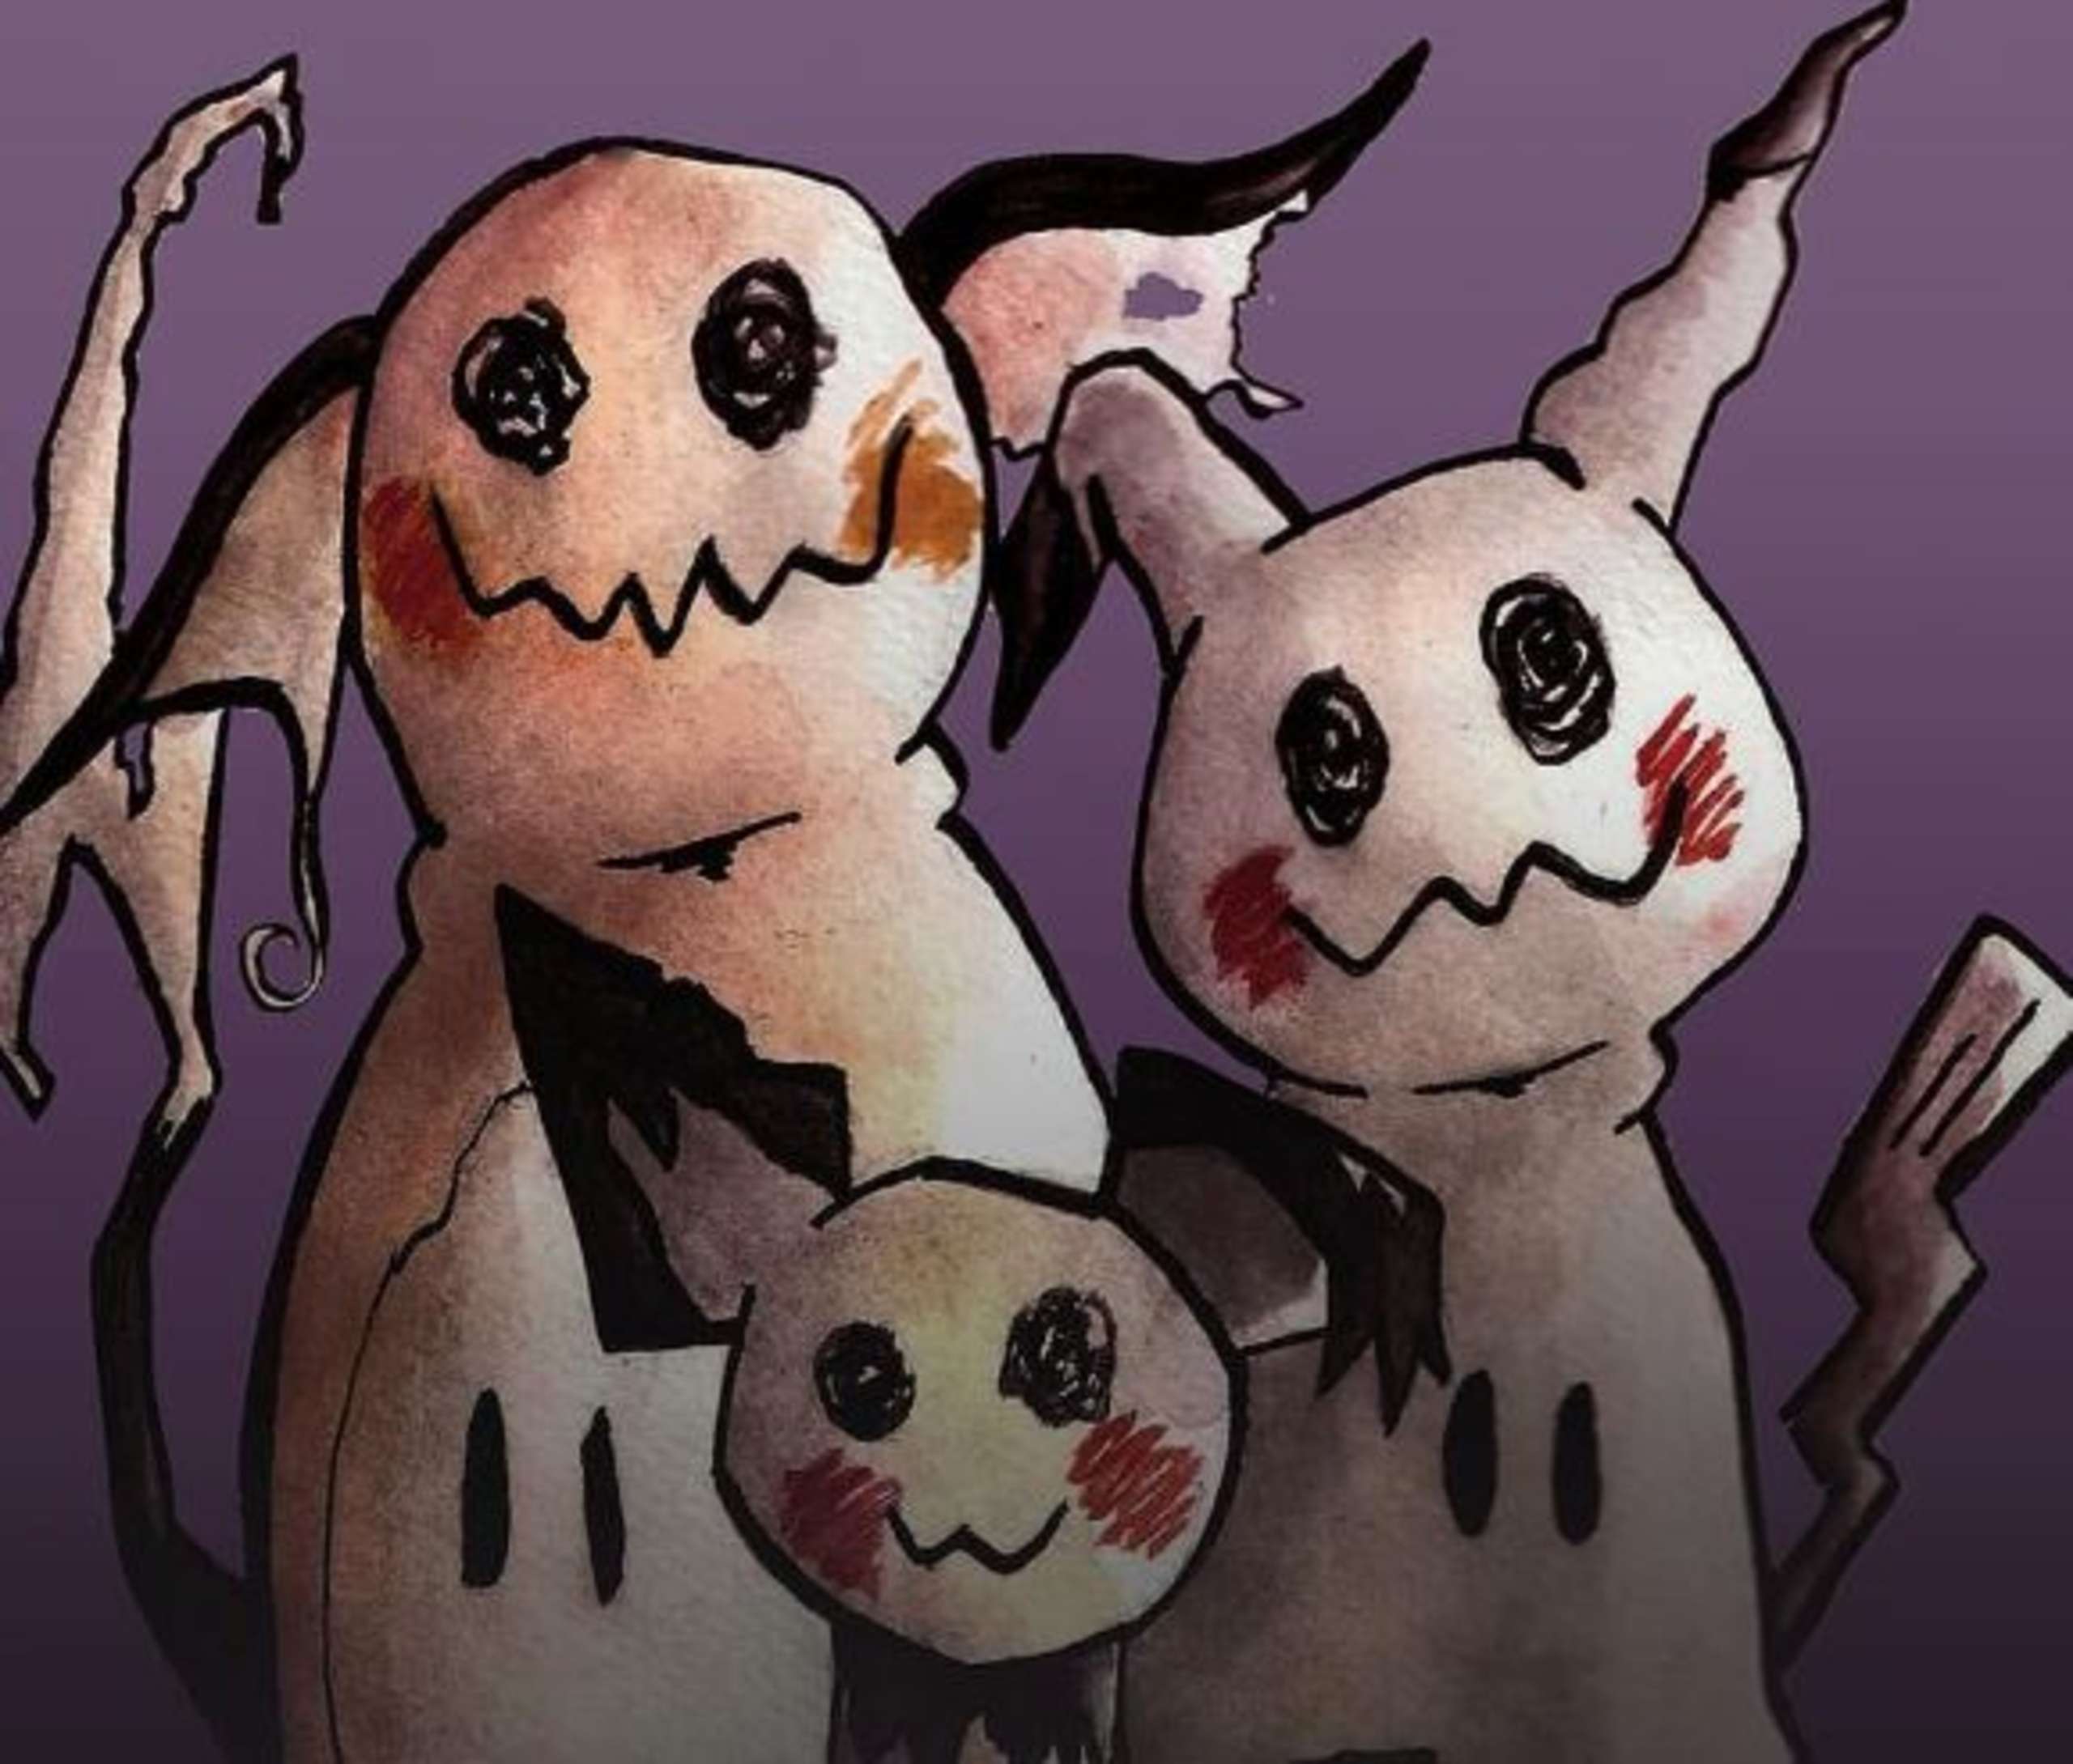 A Creative Pokemon Fan Tries To Make A Miniature Image Of The Eerie Ghost/Fairy-Type Mimikyu